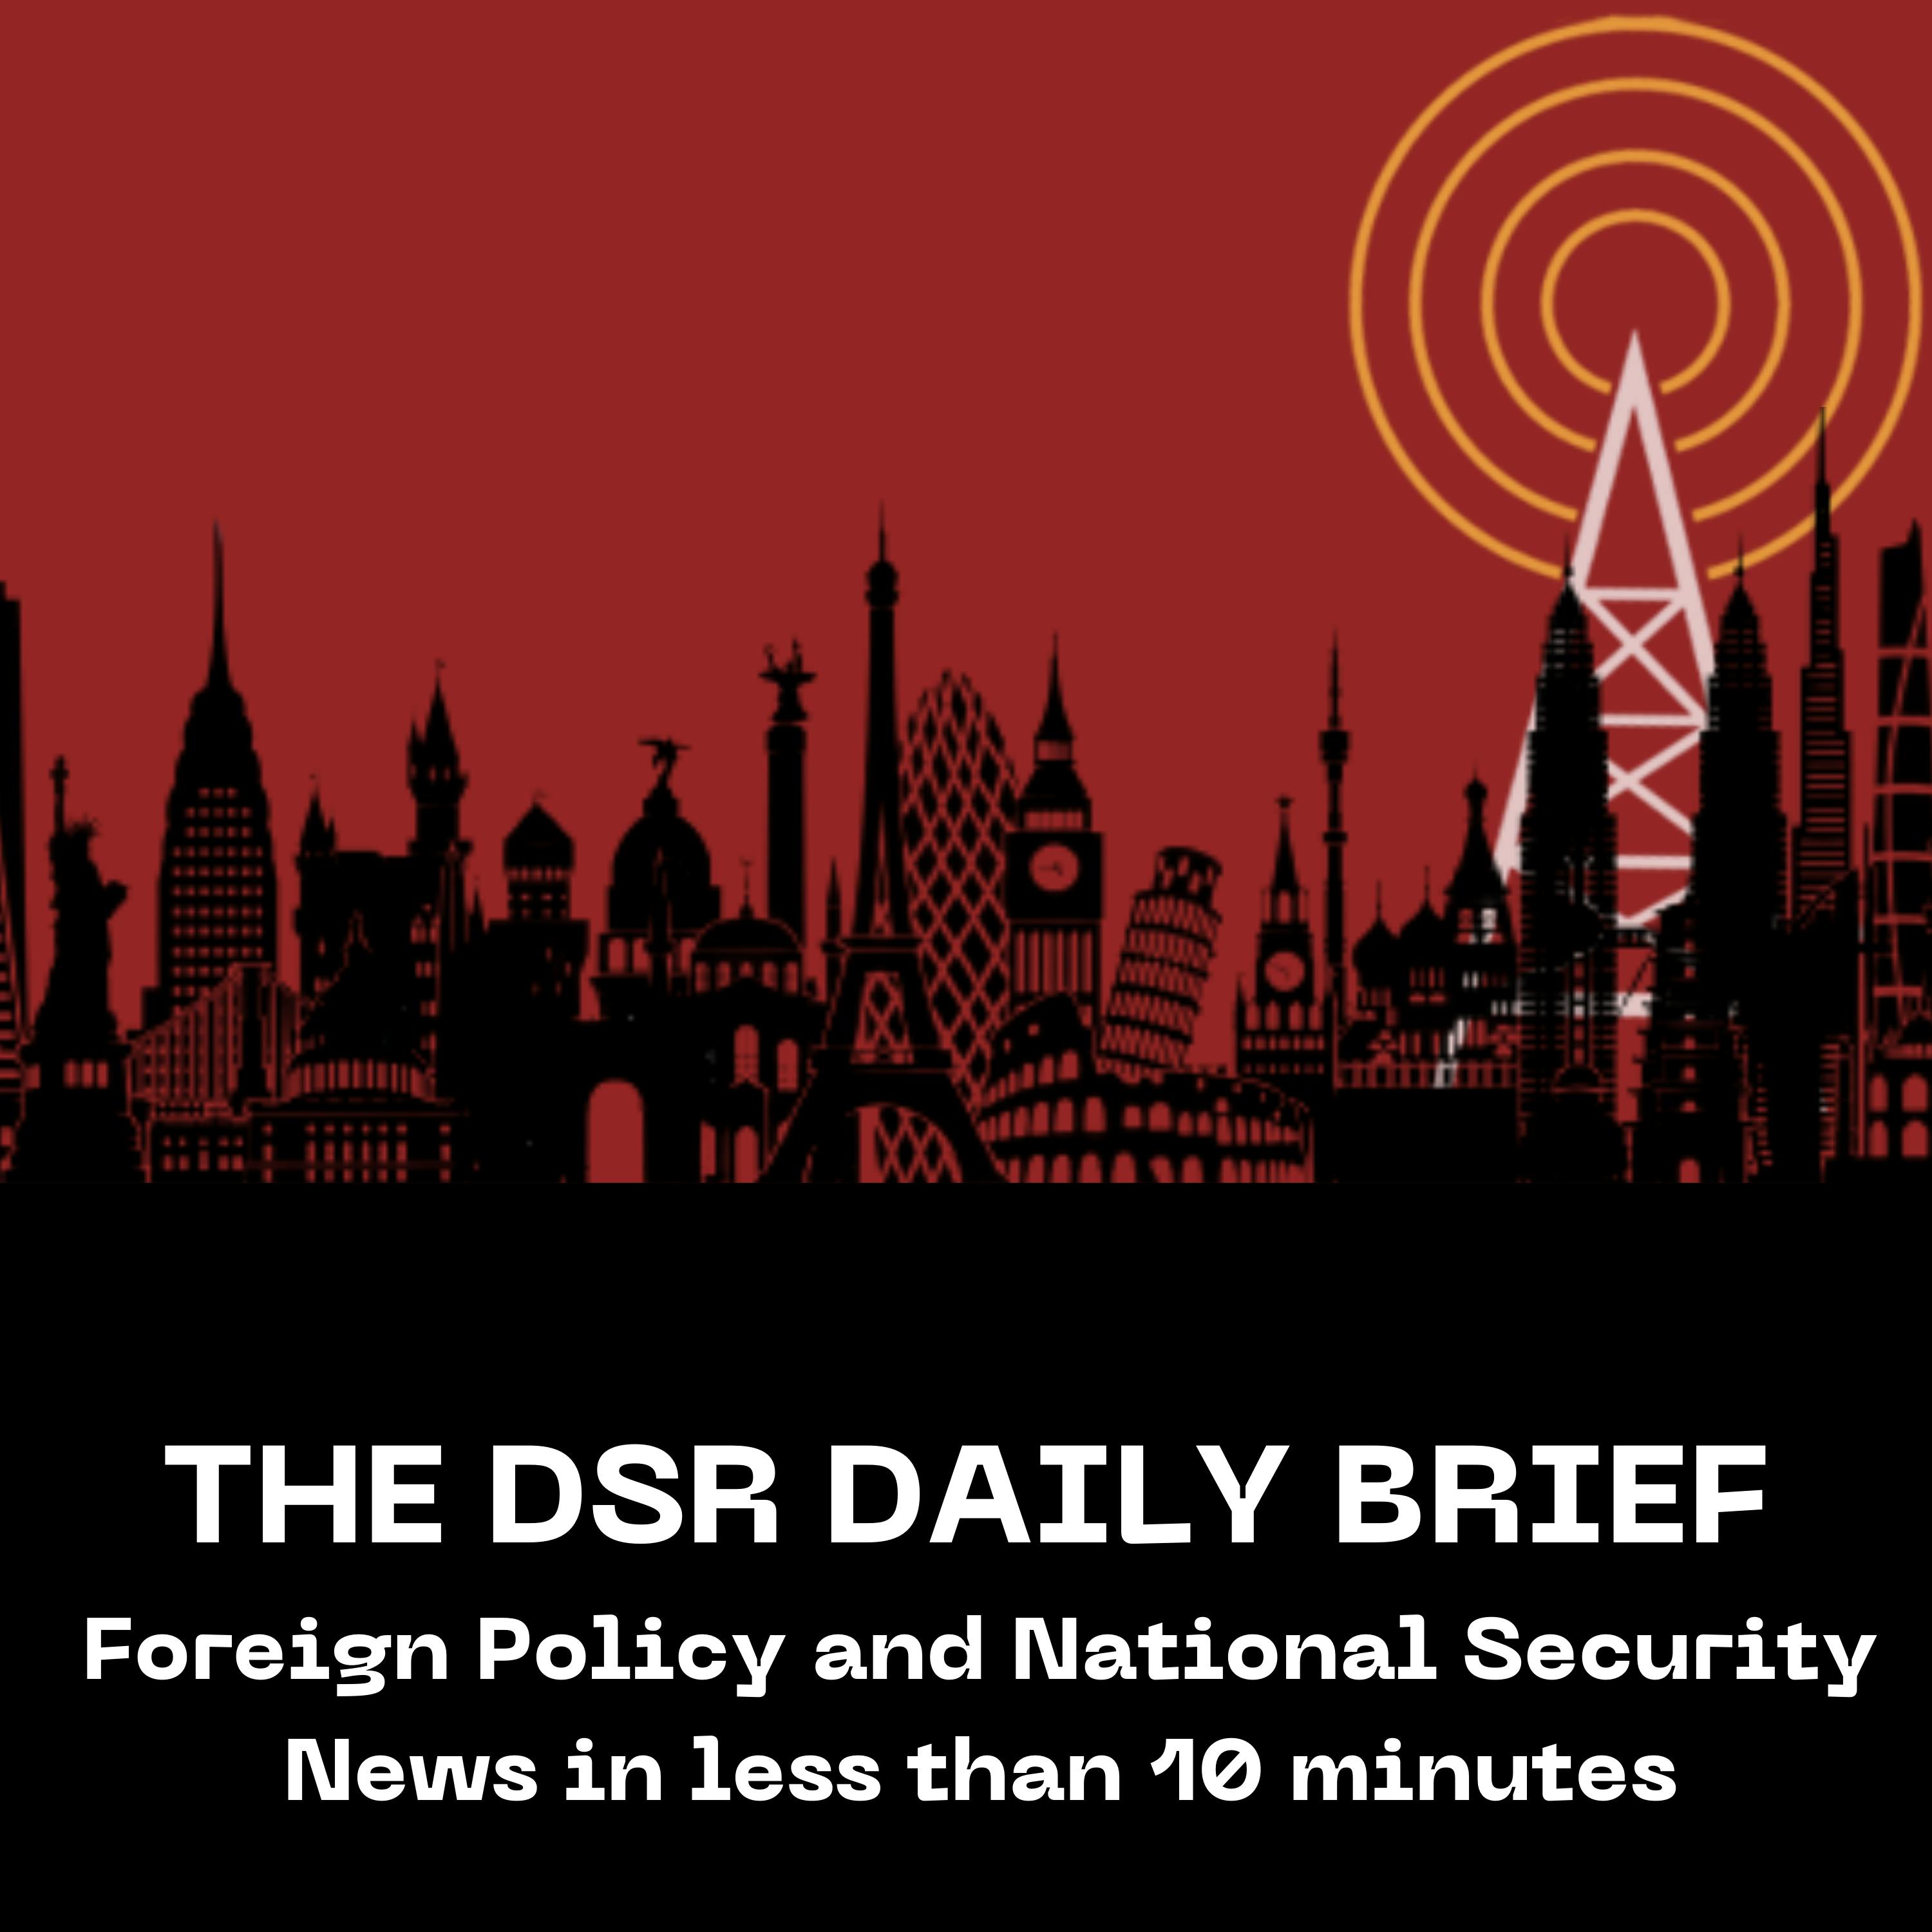 The DSR Daily for May 10: New Testimonies in Trump’s Criminal Trial, UN General Assembly Set to Back Palestinian Membership